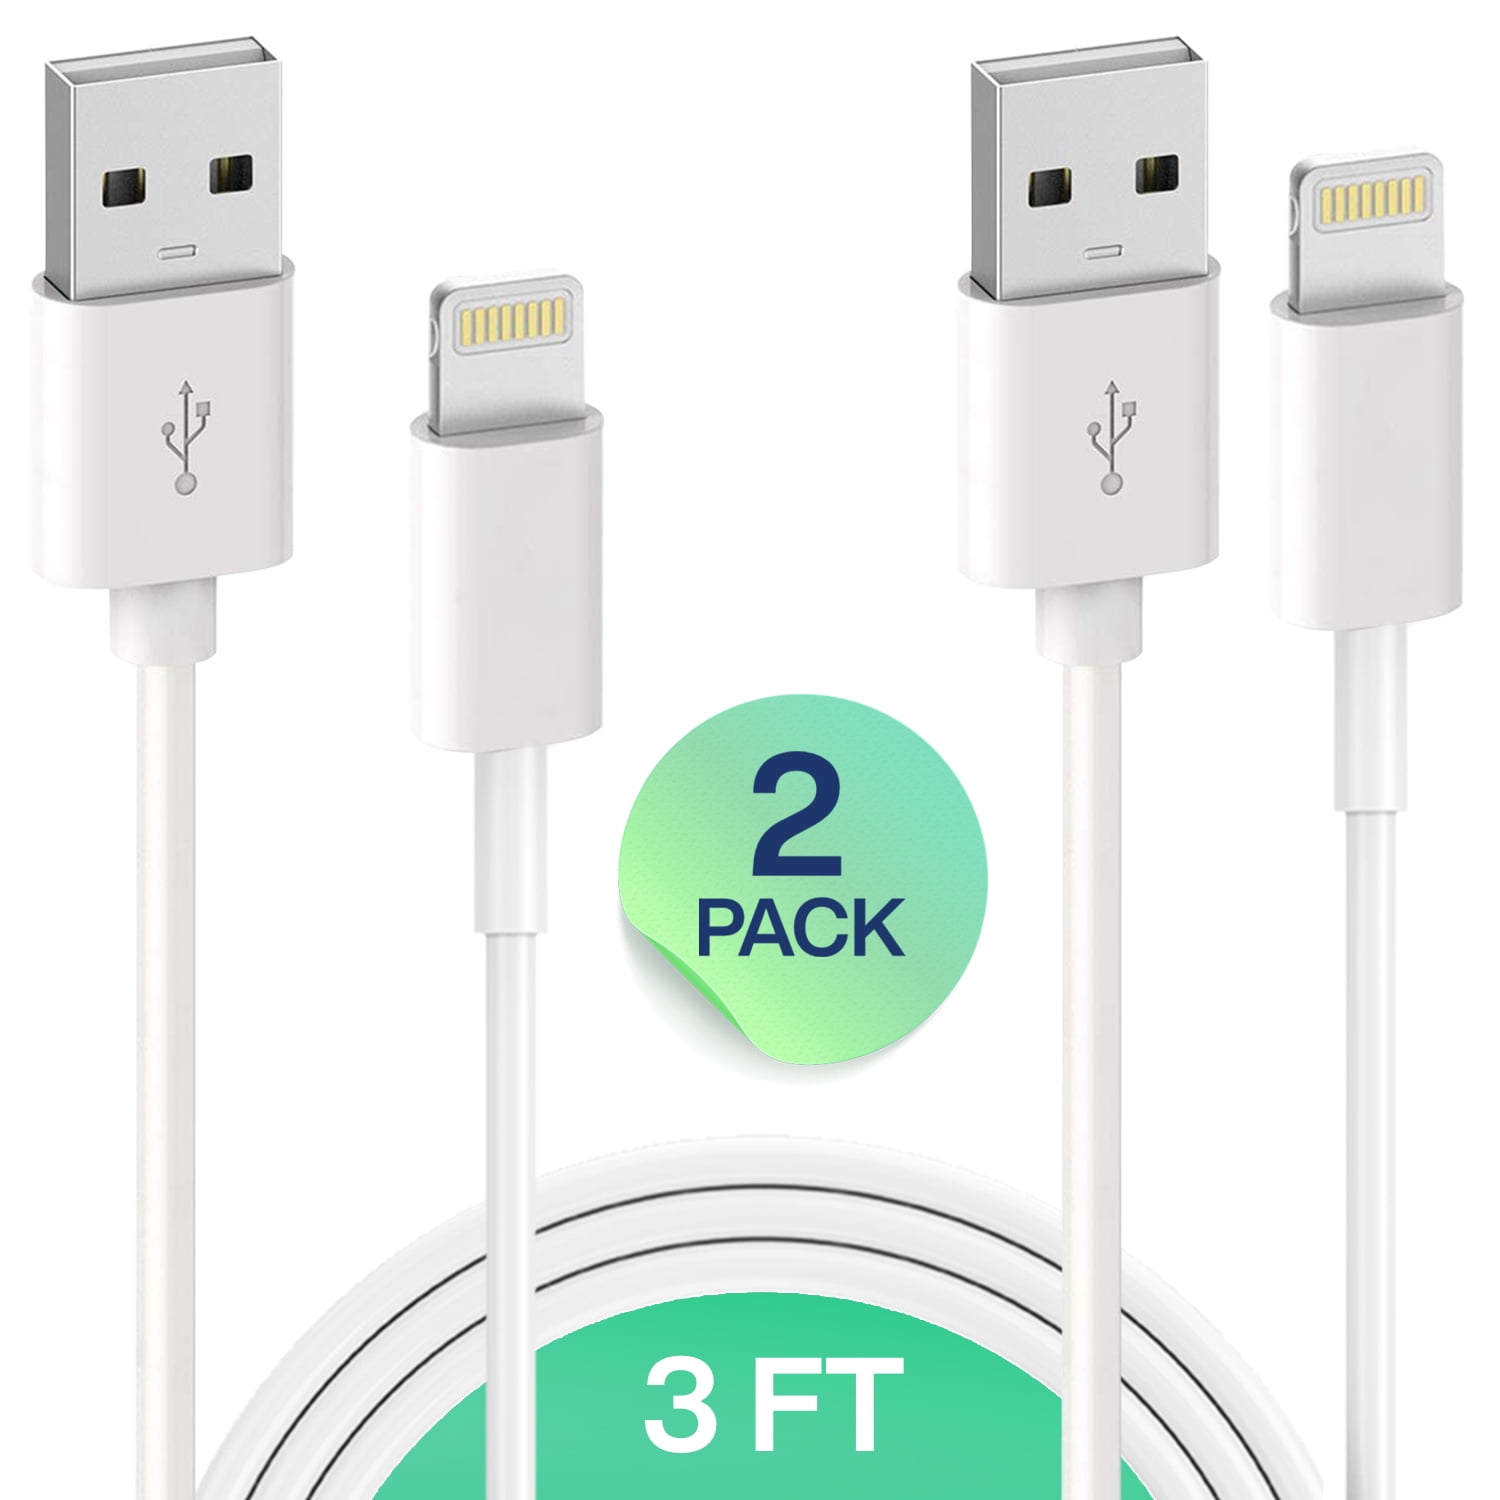 iPhone Charger Lightning Infinite Power, 2 Pack 3FT USB Cable,Compatible with iPhone Xs/Xs Max/XR/X/8/8 Plus/7/7 Plus/Air/Mini/iPod Touch/Case, Charging & Syncing Cord - Walmart.com